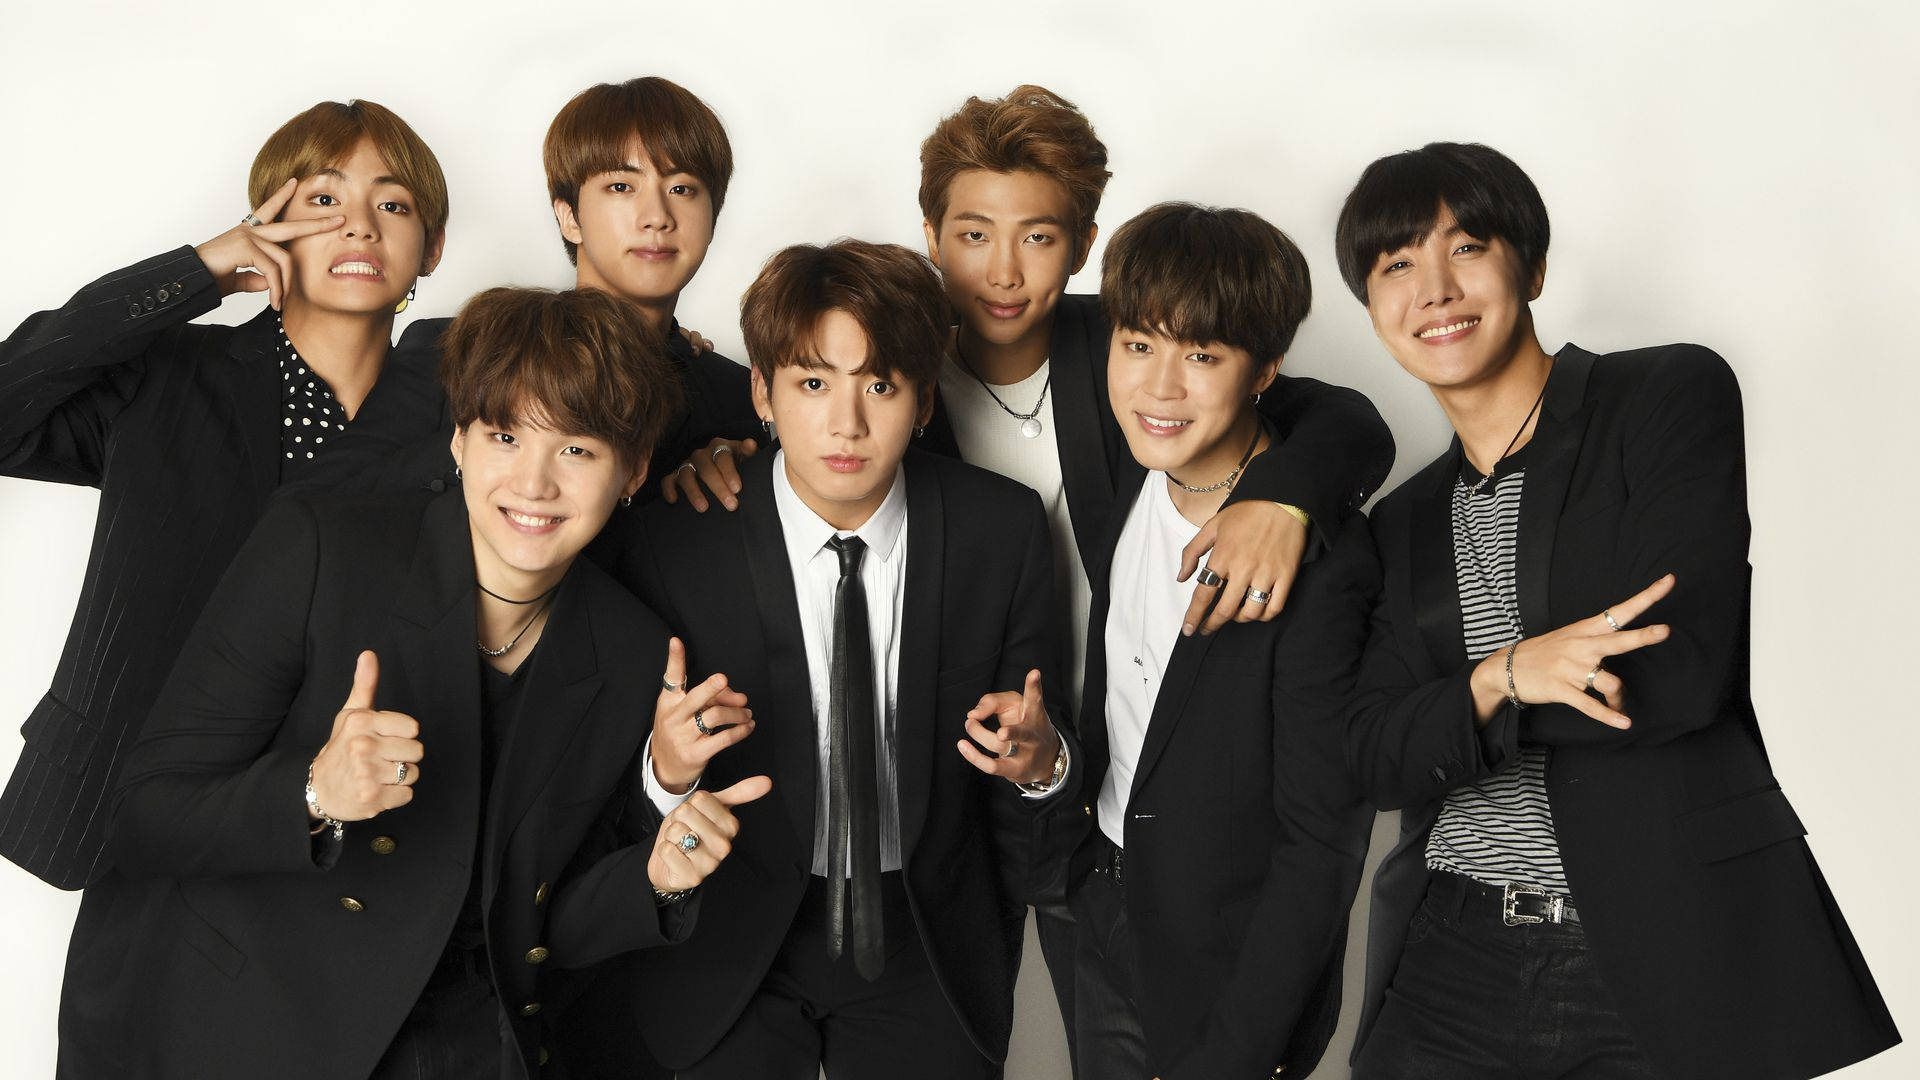 Download BTS in Black Suits, Making an Impression Wallpaper